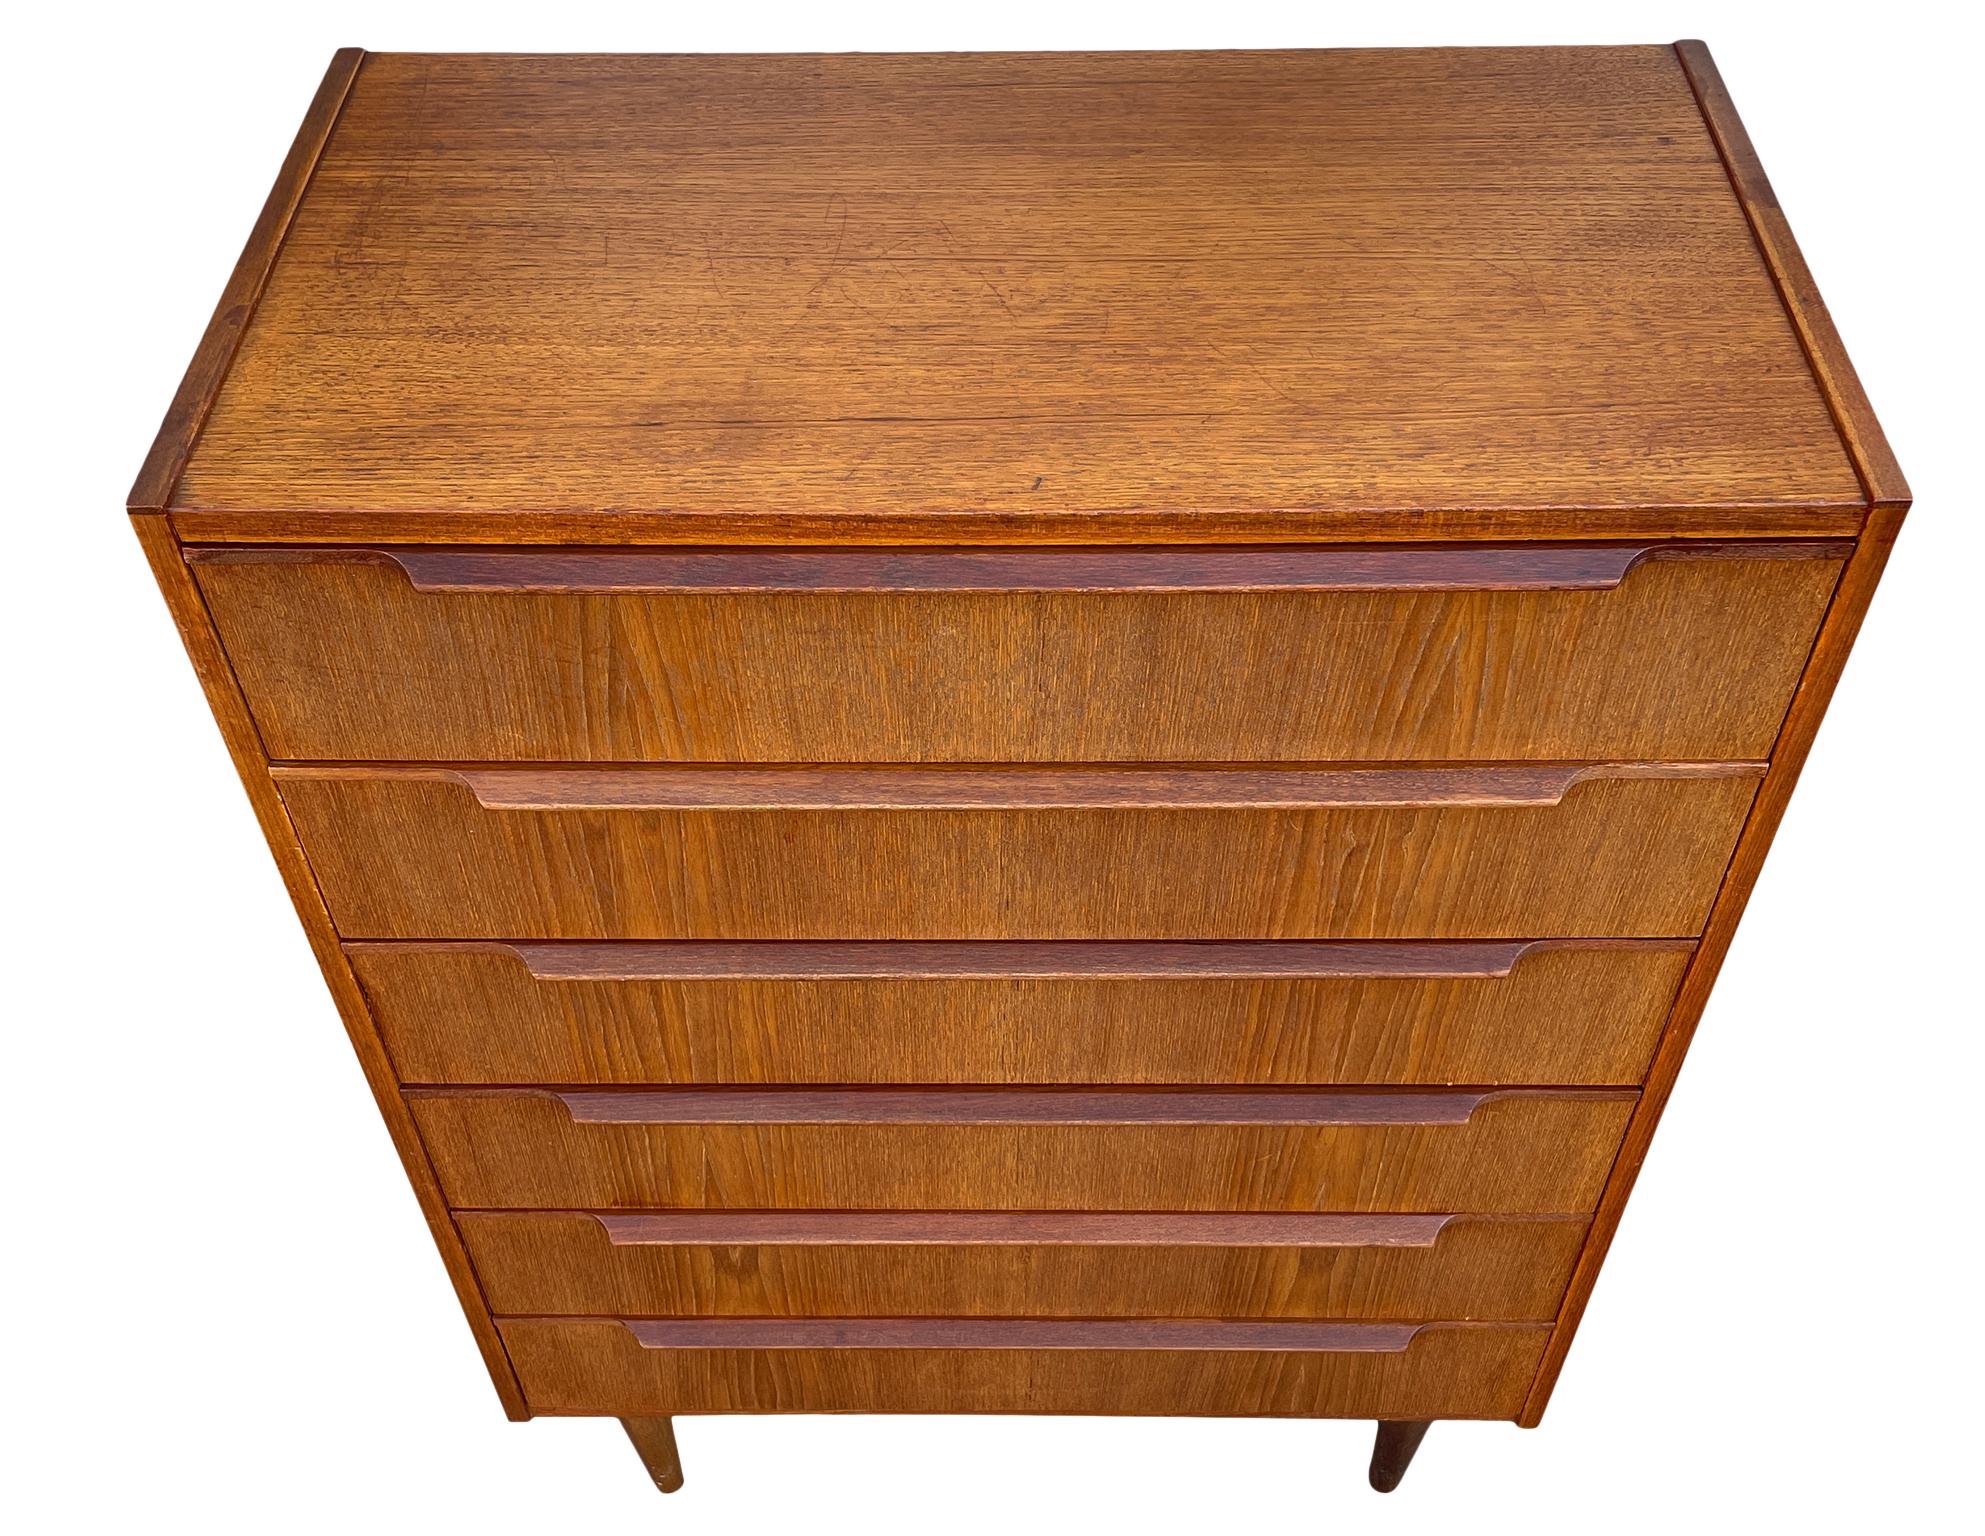 Petite mid century Danish modern 6 drawer small teak dresser. Very small teak Dresser with carved teak handles on 4 tapered legs. Great for a child's room. Located in Brooklyn NYC.